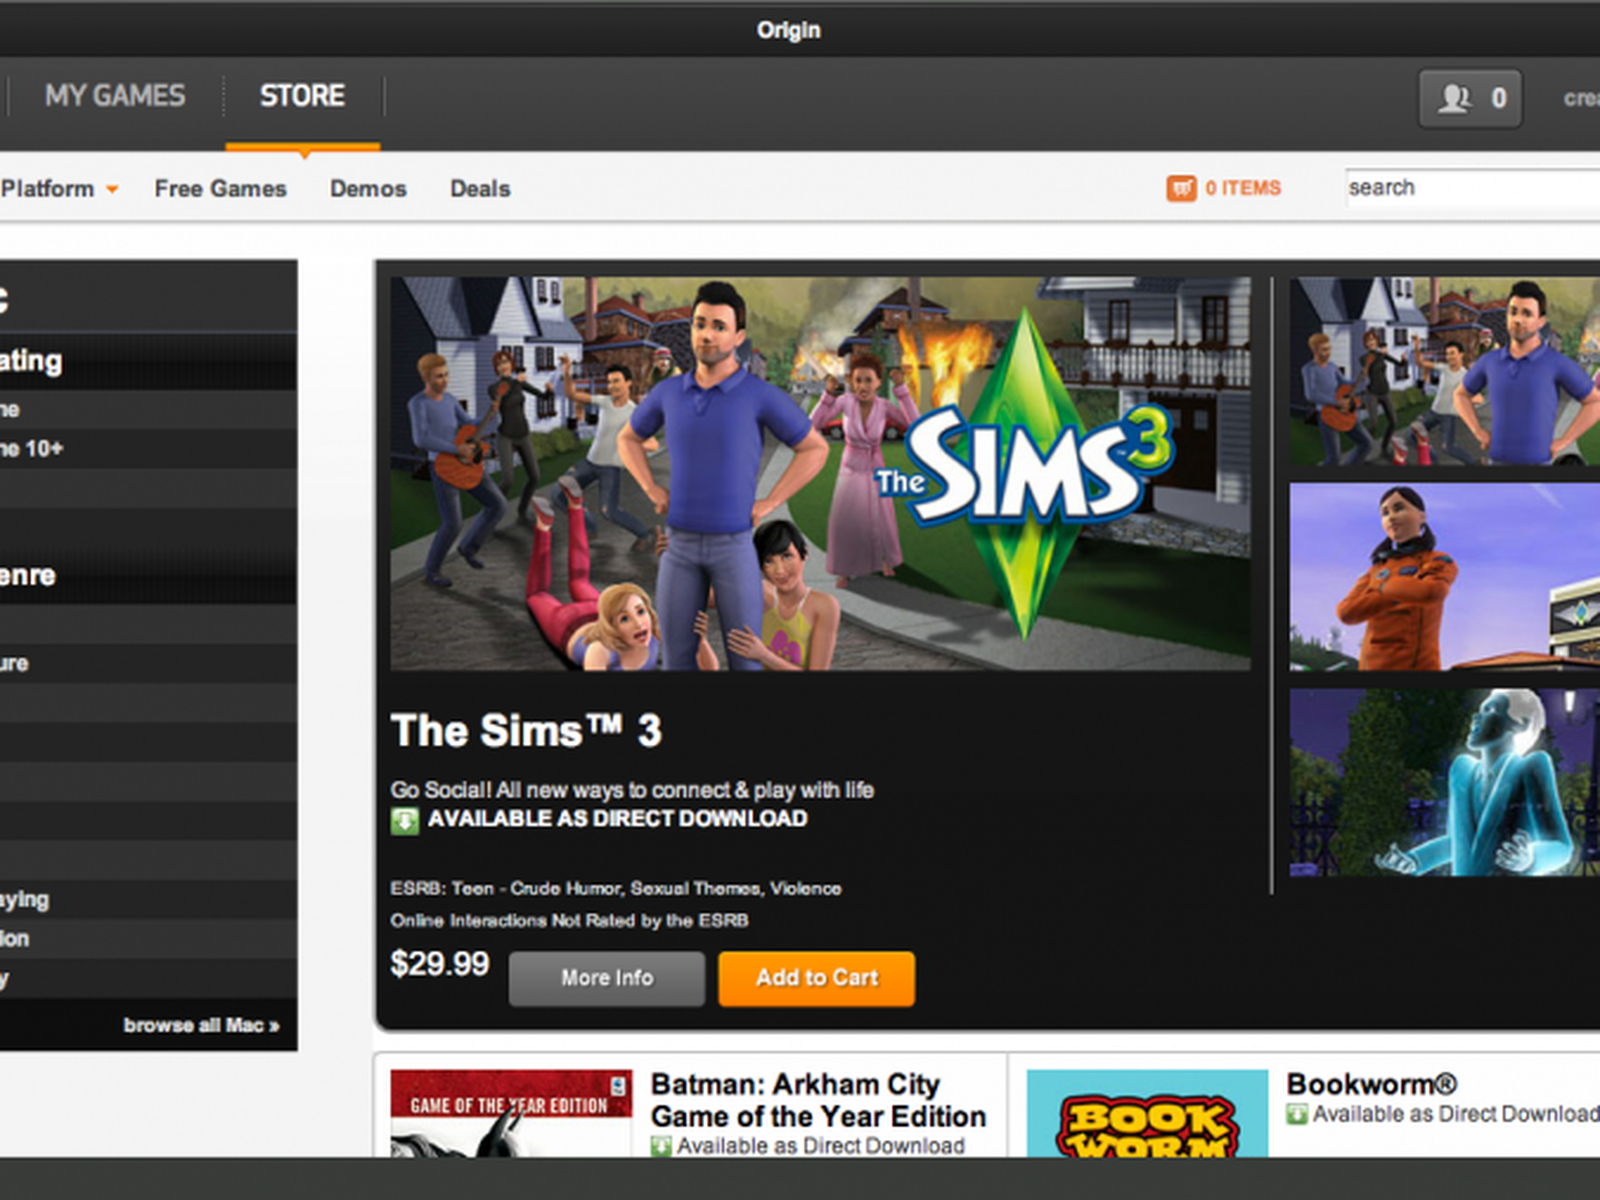 Sims 4 not showing up on Origin for Mac (details in comments) : r/thesims